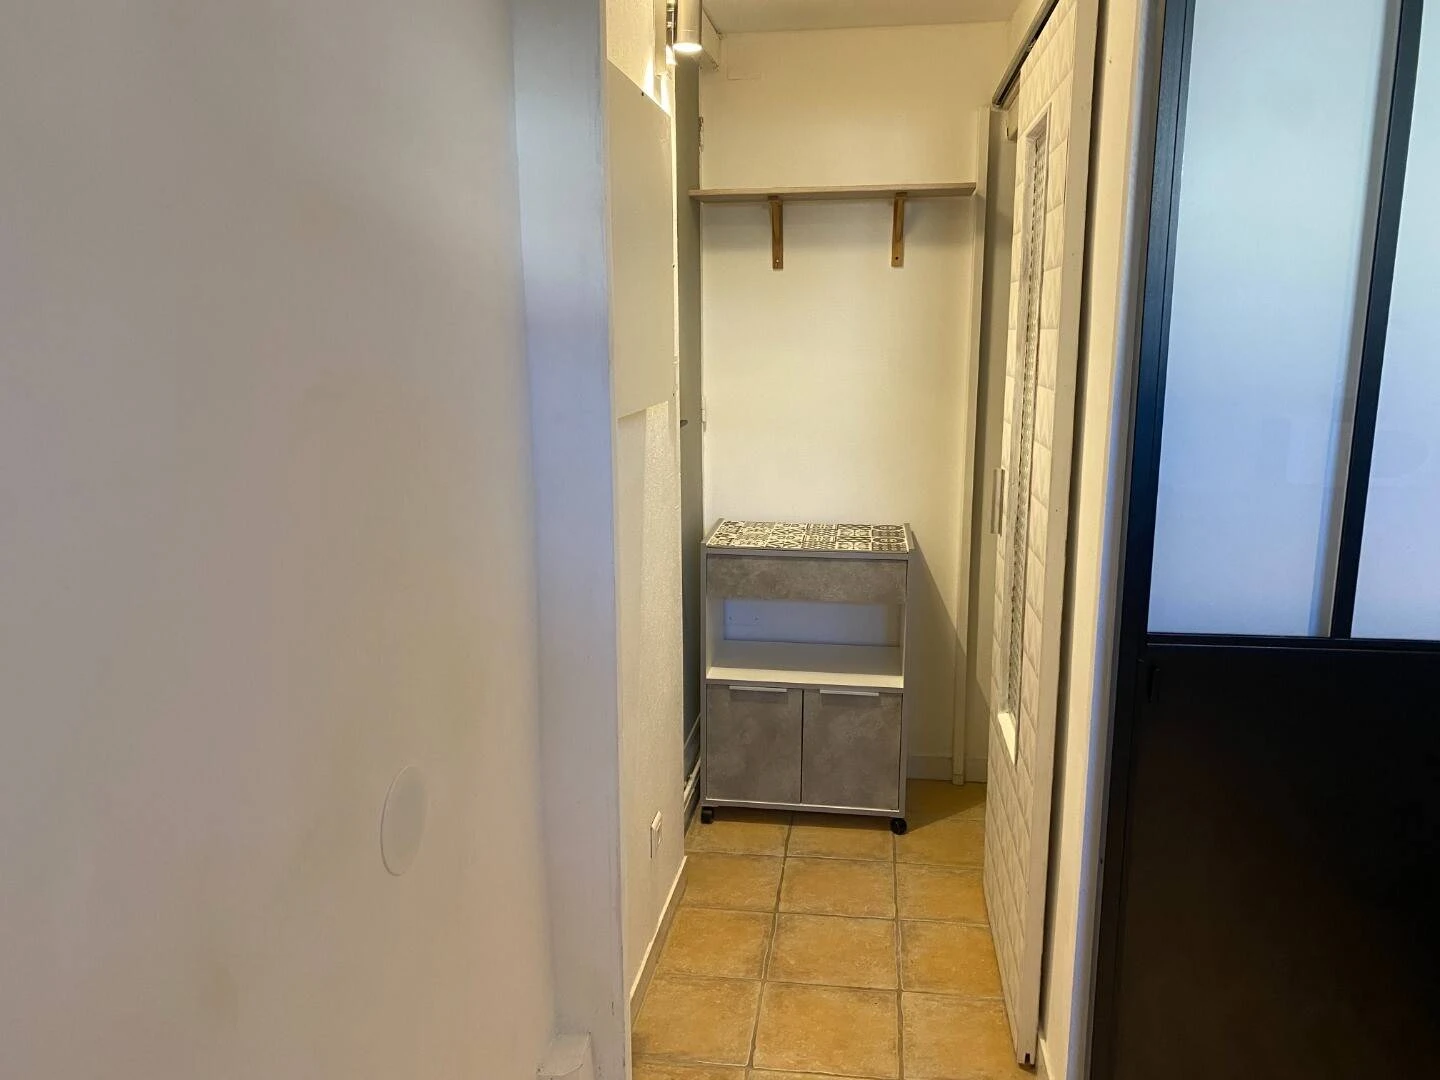 Room for rent in a shared flat in Nîmes